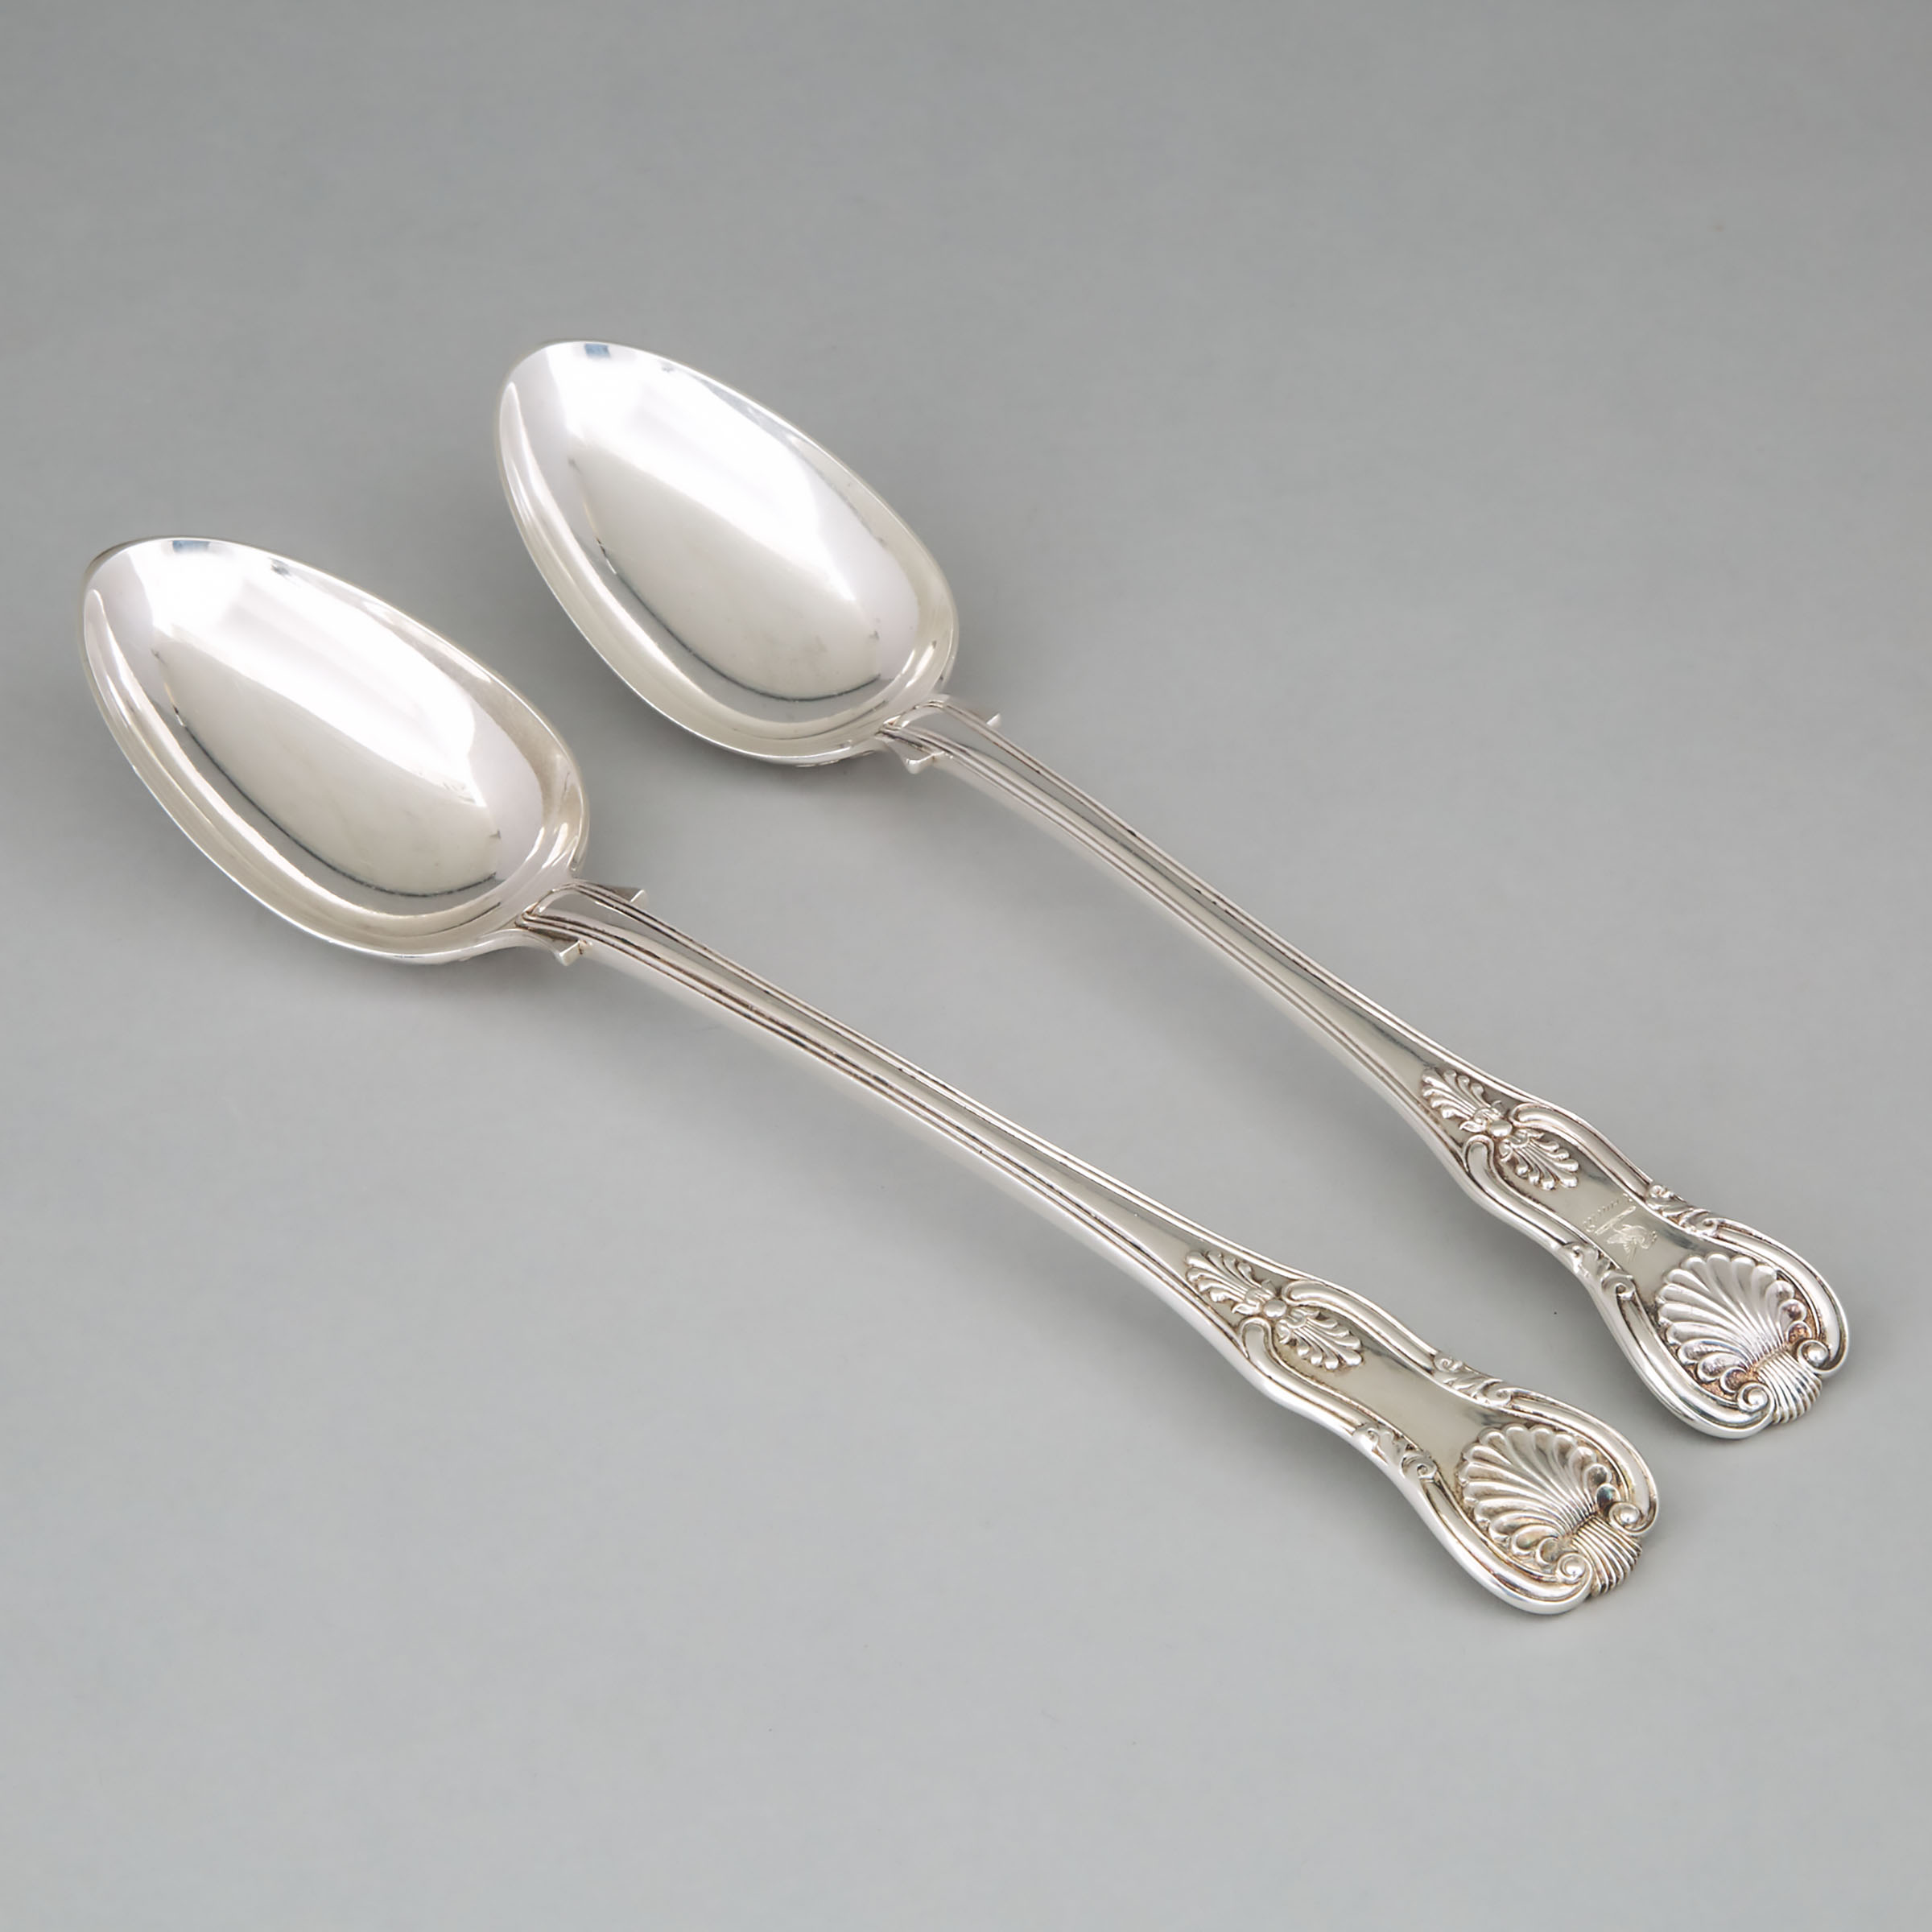 Two William IV Silver Kings Pattern Serving Spoons, William Eaton, London, 1830/34